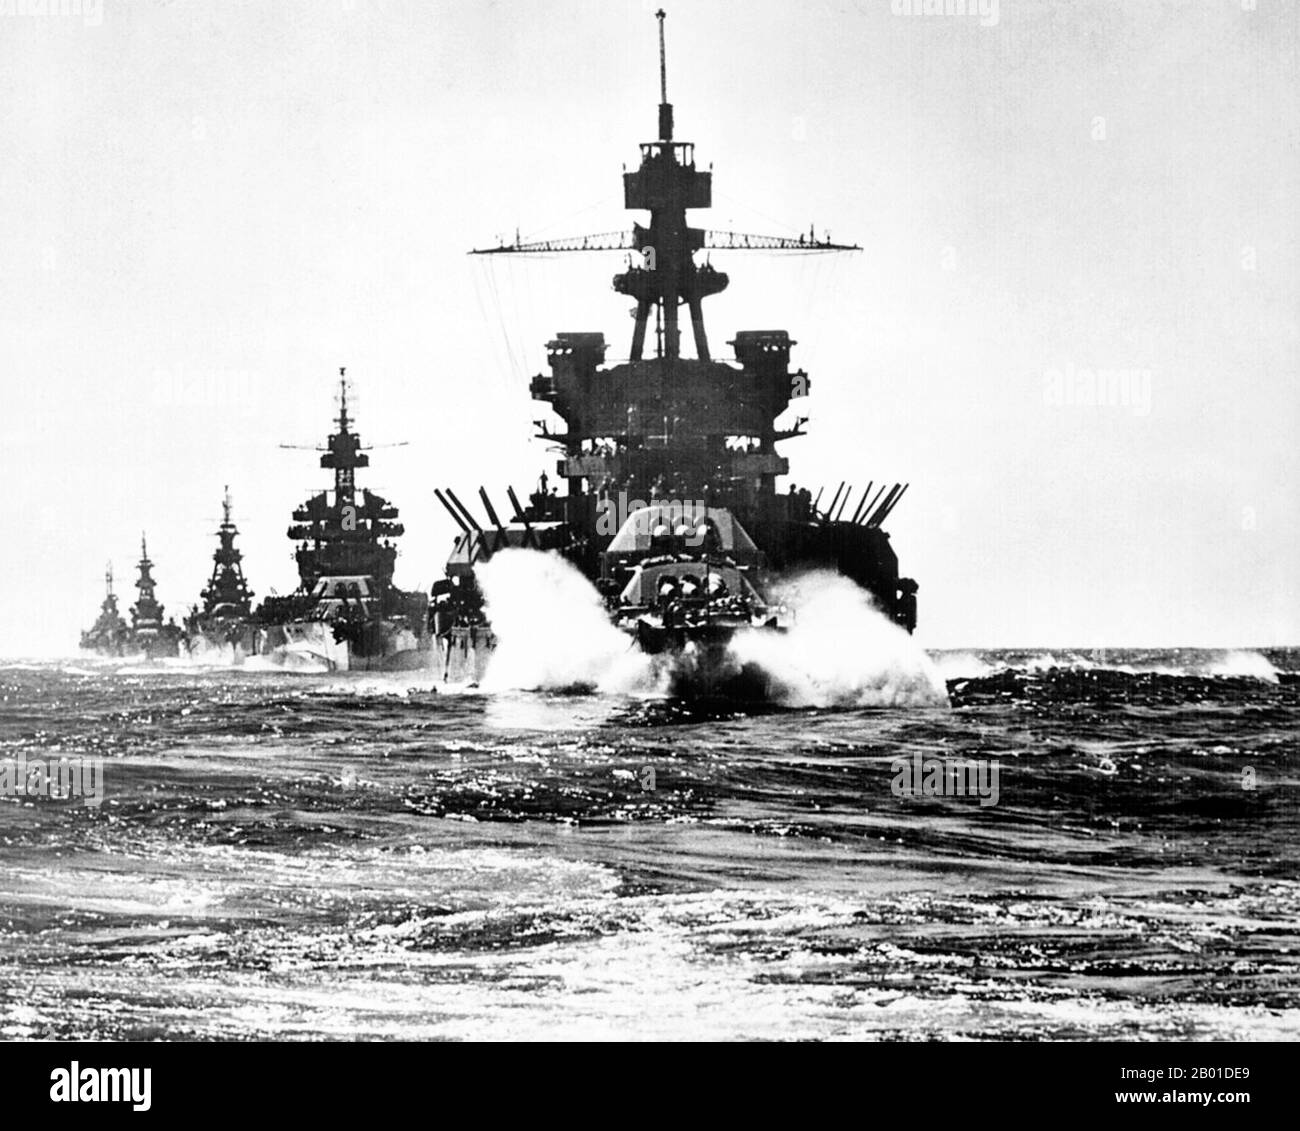 USA/Japan: USS Pennsylvania, USS Colorado, USS Louisville, USS Portland and USS Columbia enter Lingayen Gulf, Philippines, January 1945.  The battleship USS Pennsylvania leads USS Colorado, USS Louisville, USS Portland, and USS Columbia into Lingayen Gulf before the landing on Luzon, Philippines in January 1945. Battleships and other big gun naval vessels that served in the Pacific Theatre during World War II were used primarily for offshore bombardment of enemy positions and as anti-aircraft screens for aircraft carriers. Stock Photo